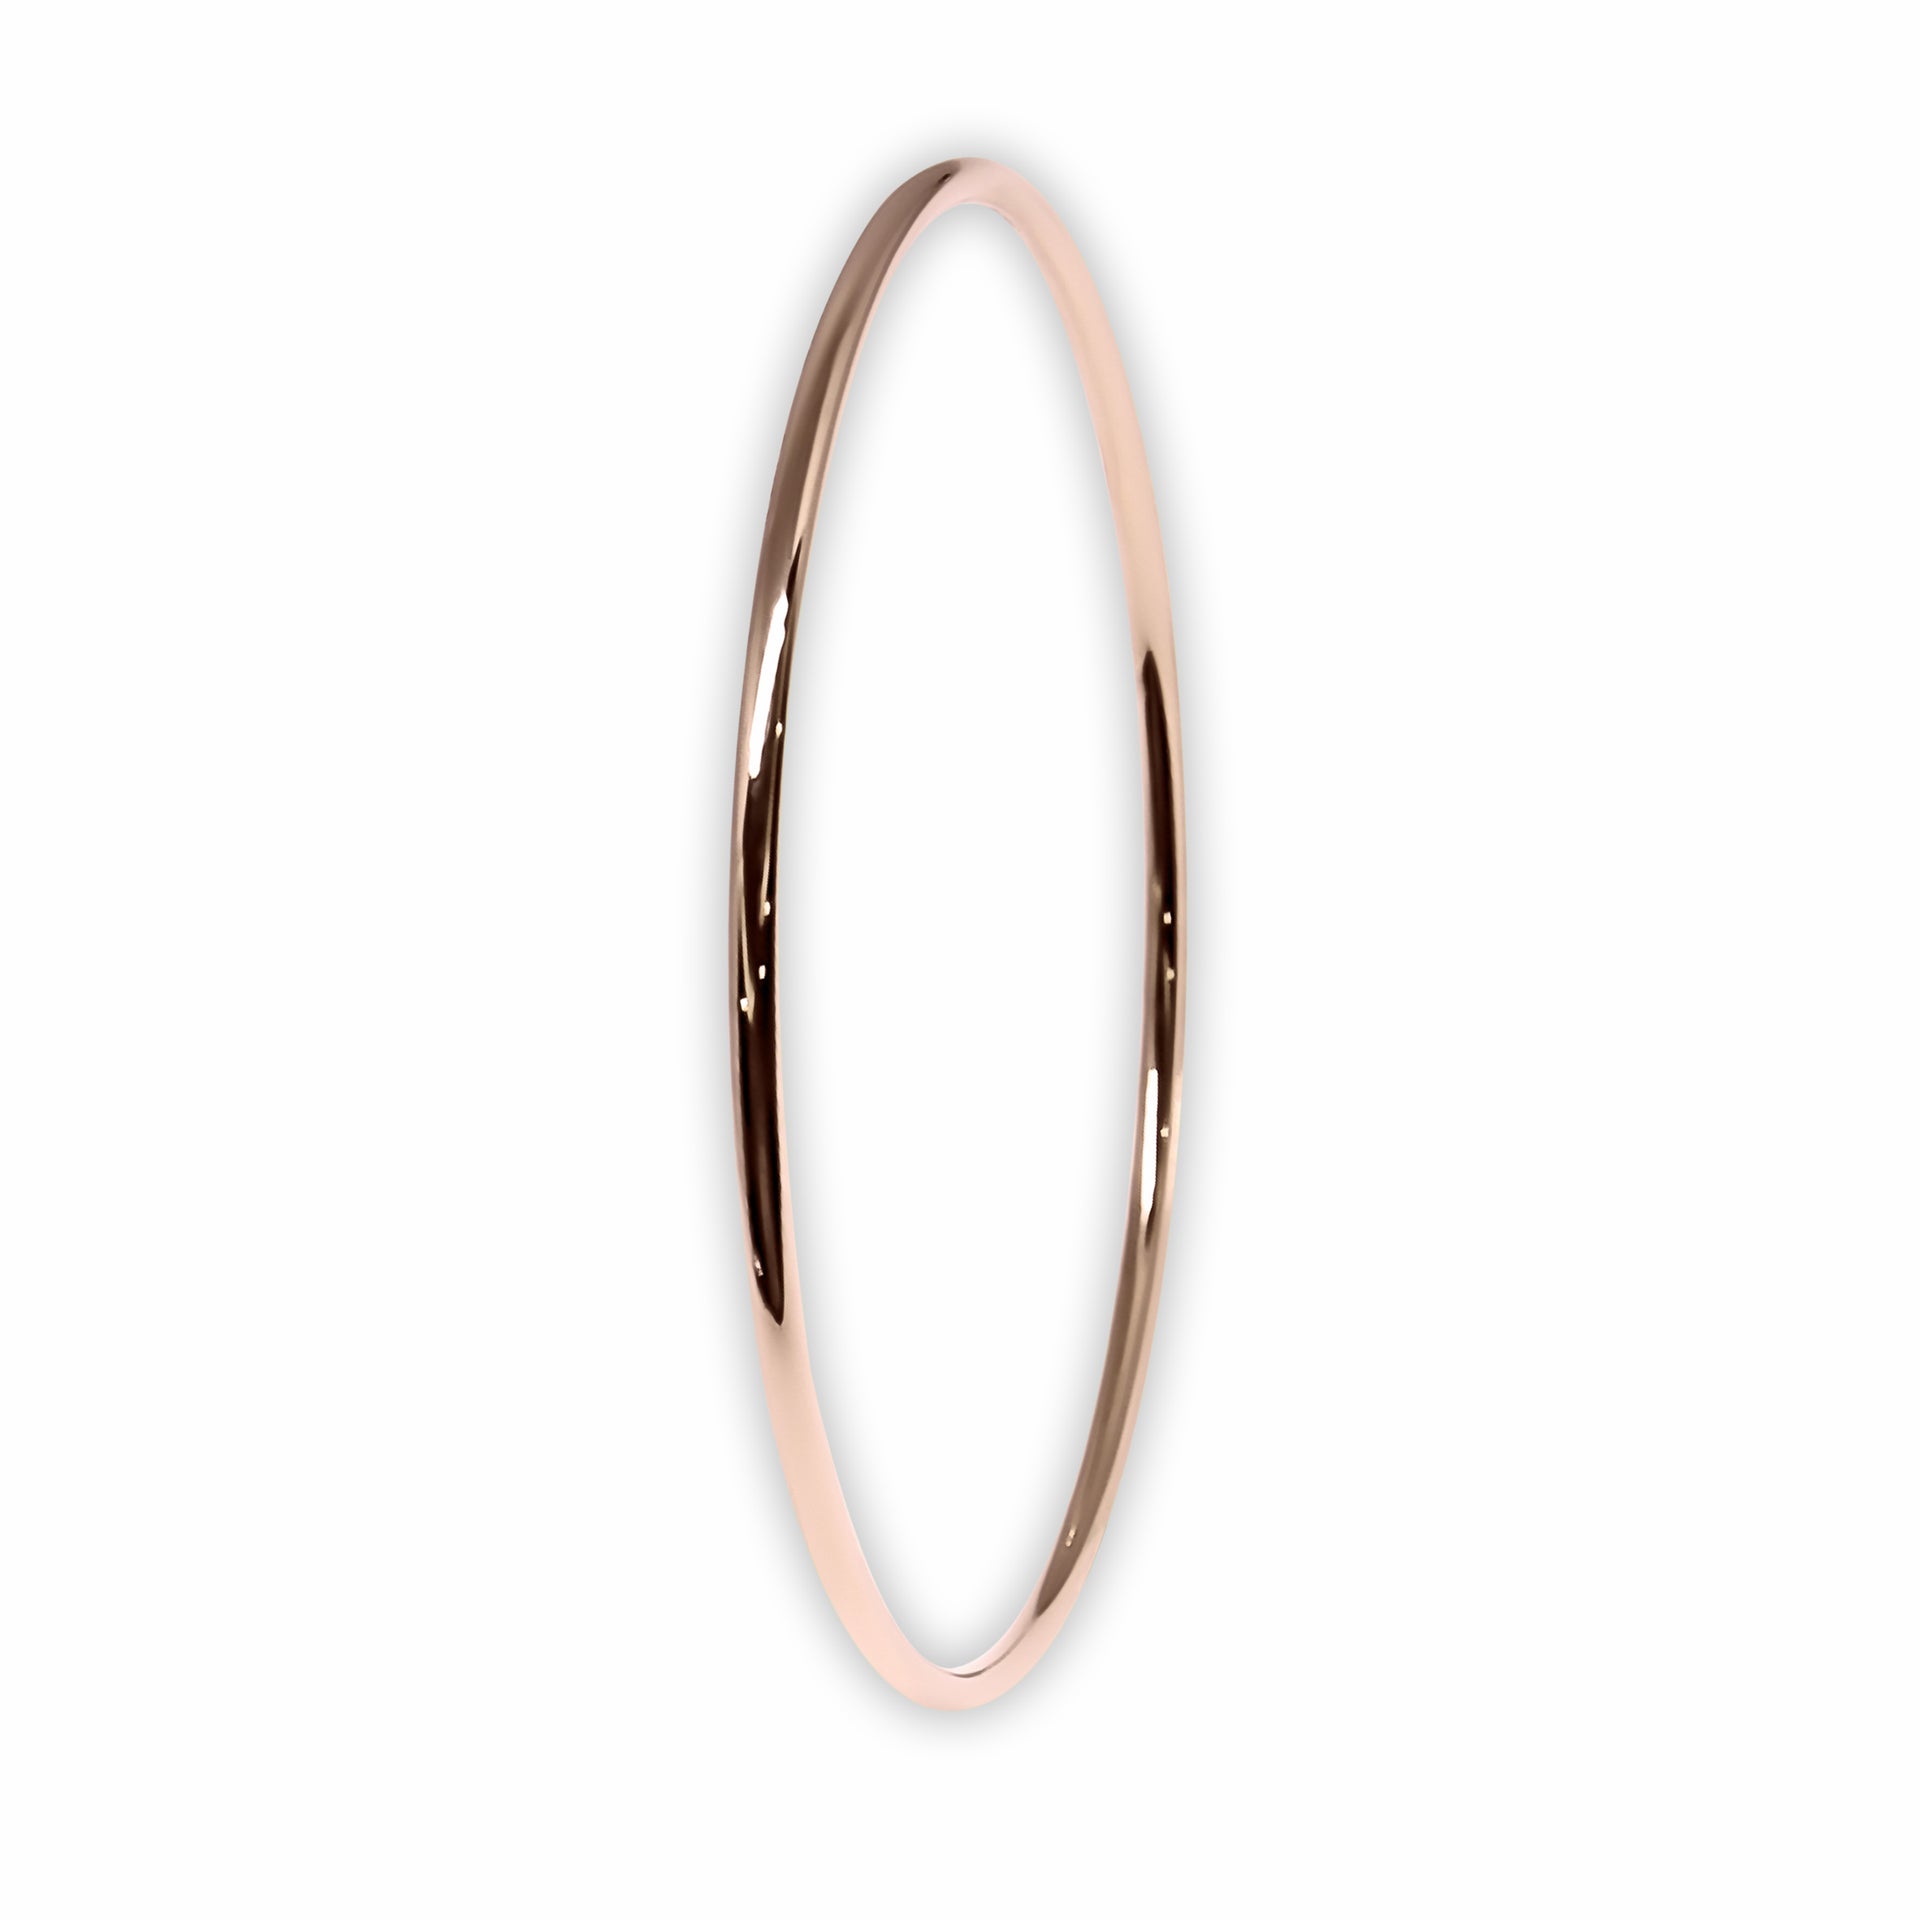 Bangle EARTH IS ROUND 2mm round red gold 18k 750